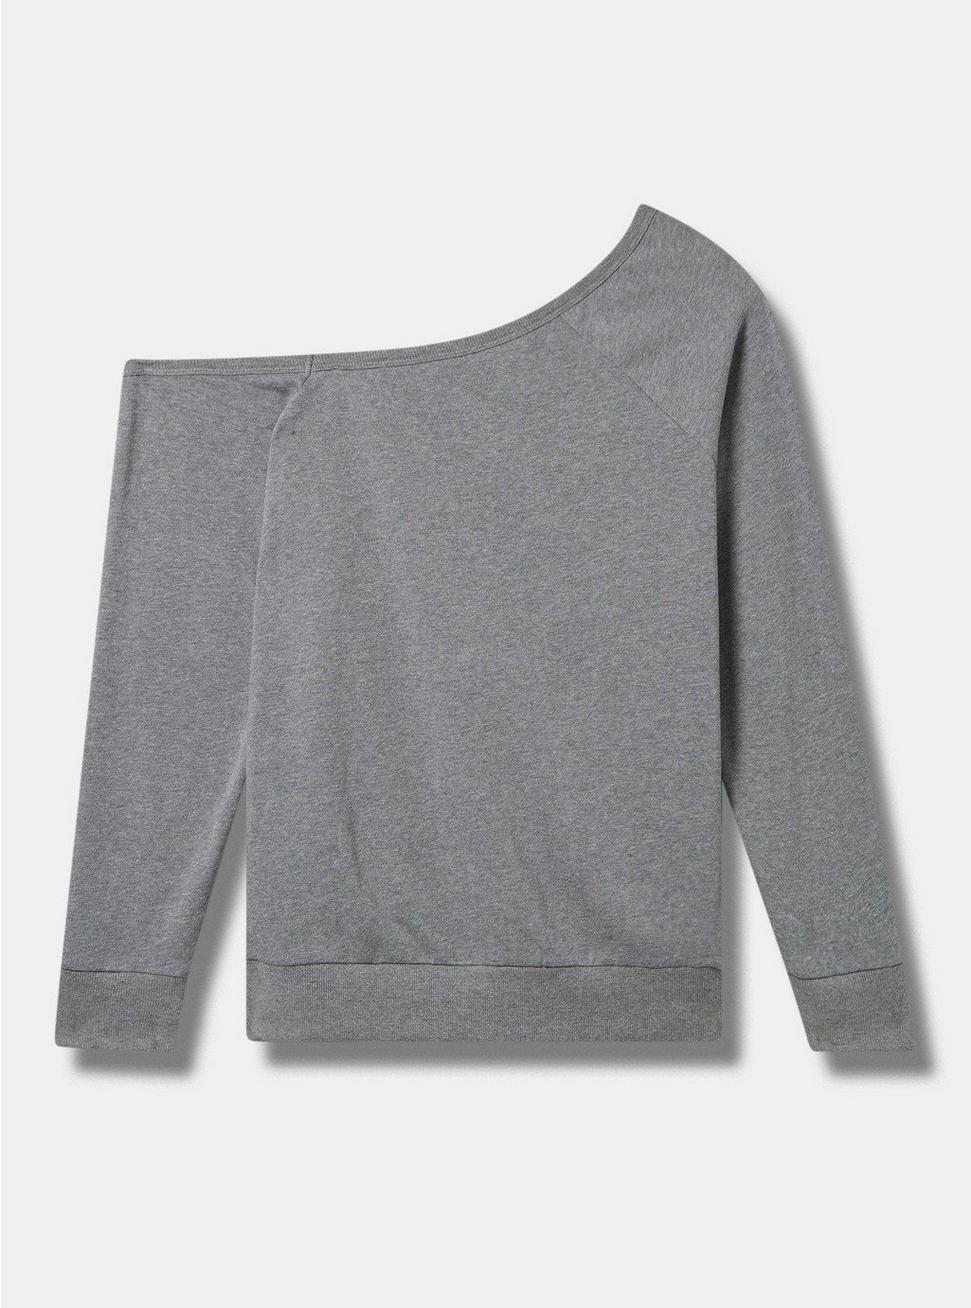 Plus Size Saved By The Bell French Terry Off Shoulder Sweatshirt, MEDIUM HEATHER GREY, alternate